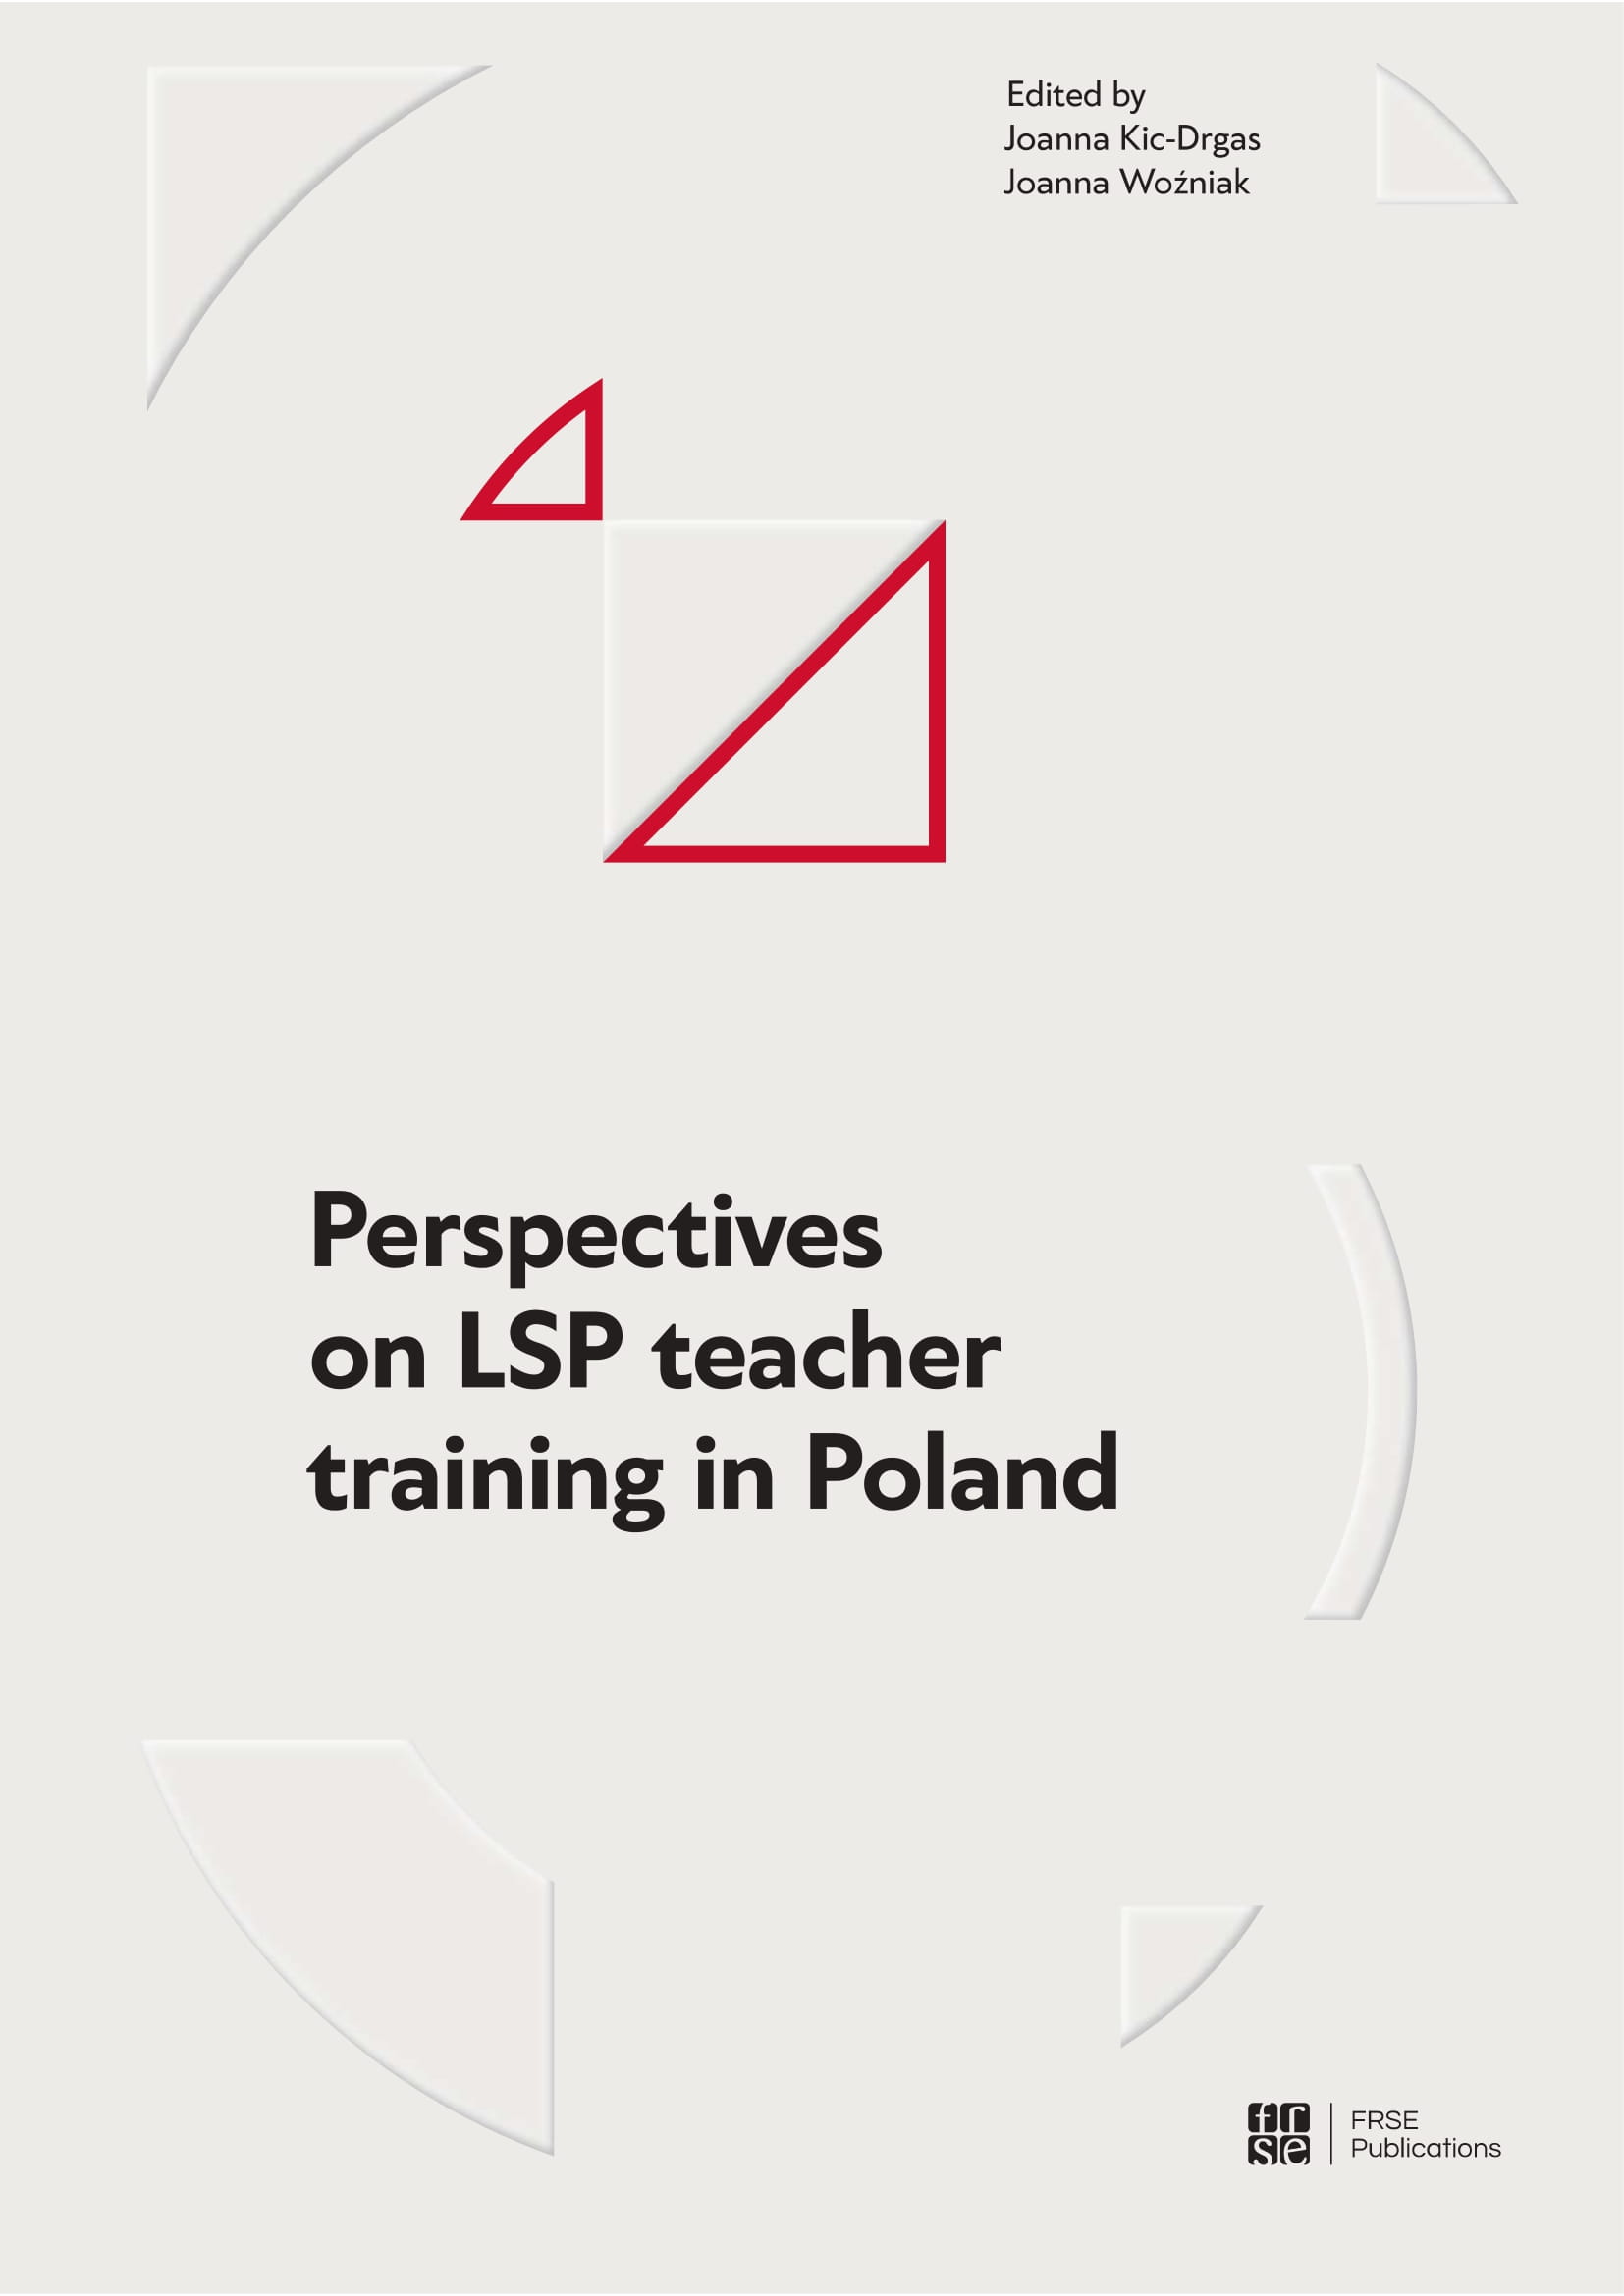 Perspectives on LSP teacher training in Poland